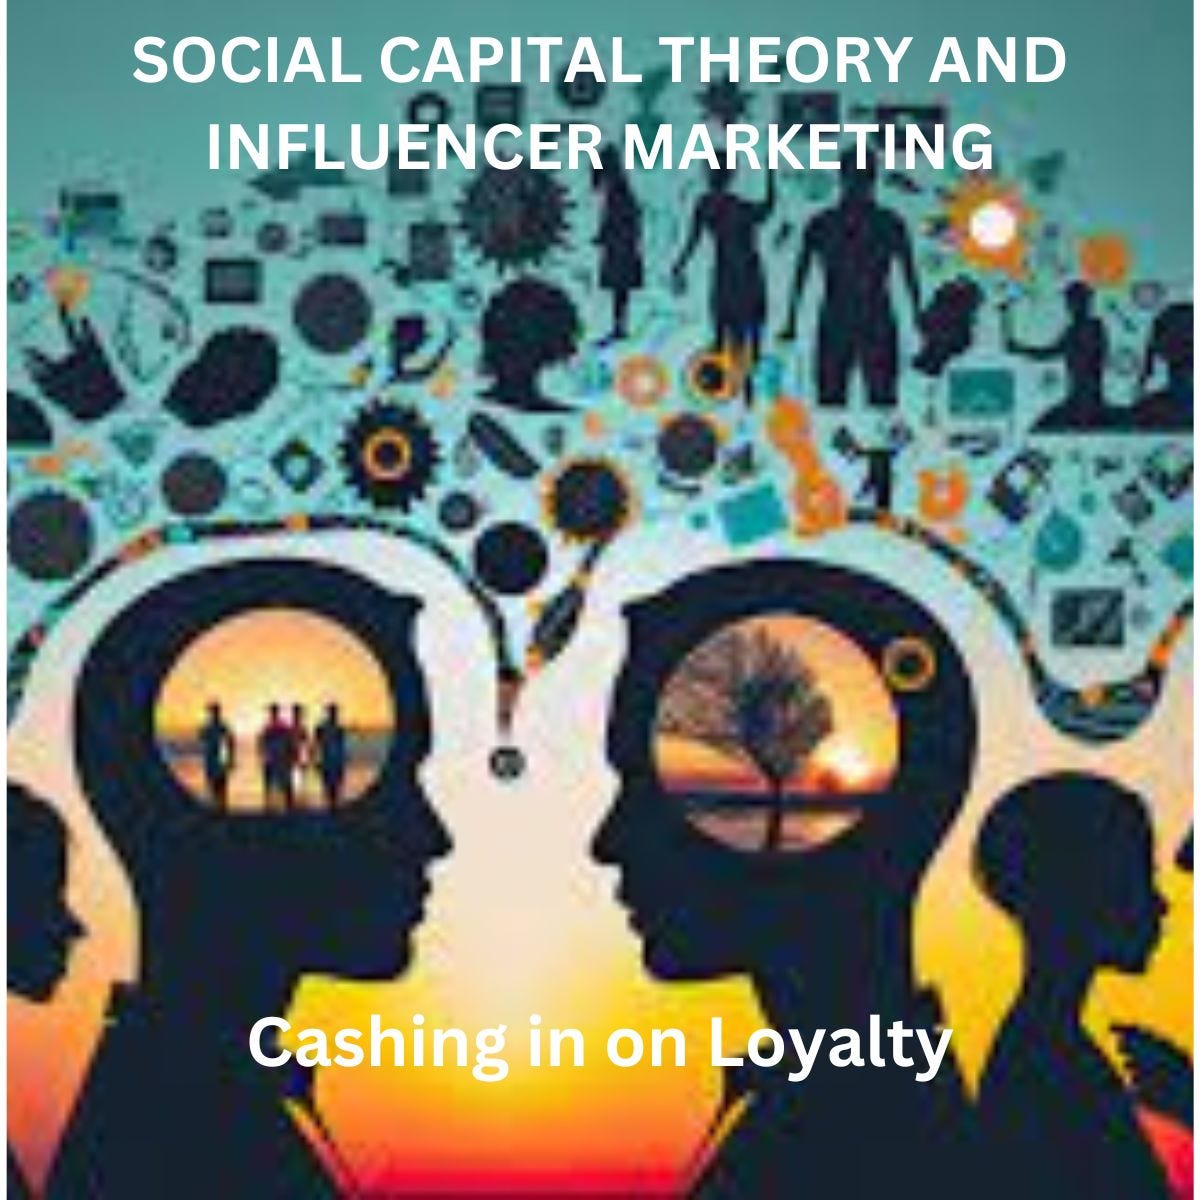 Leveraging Social Capital Theory for Influencer Marketing